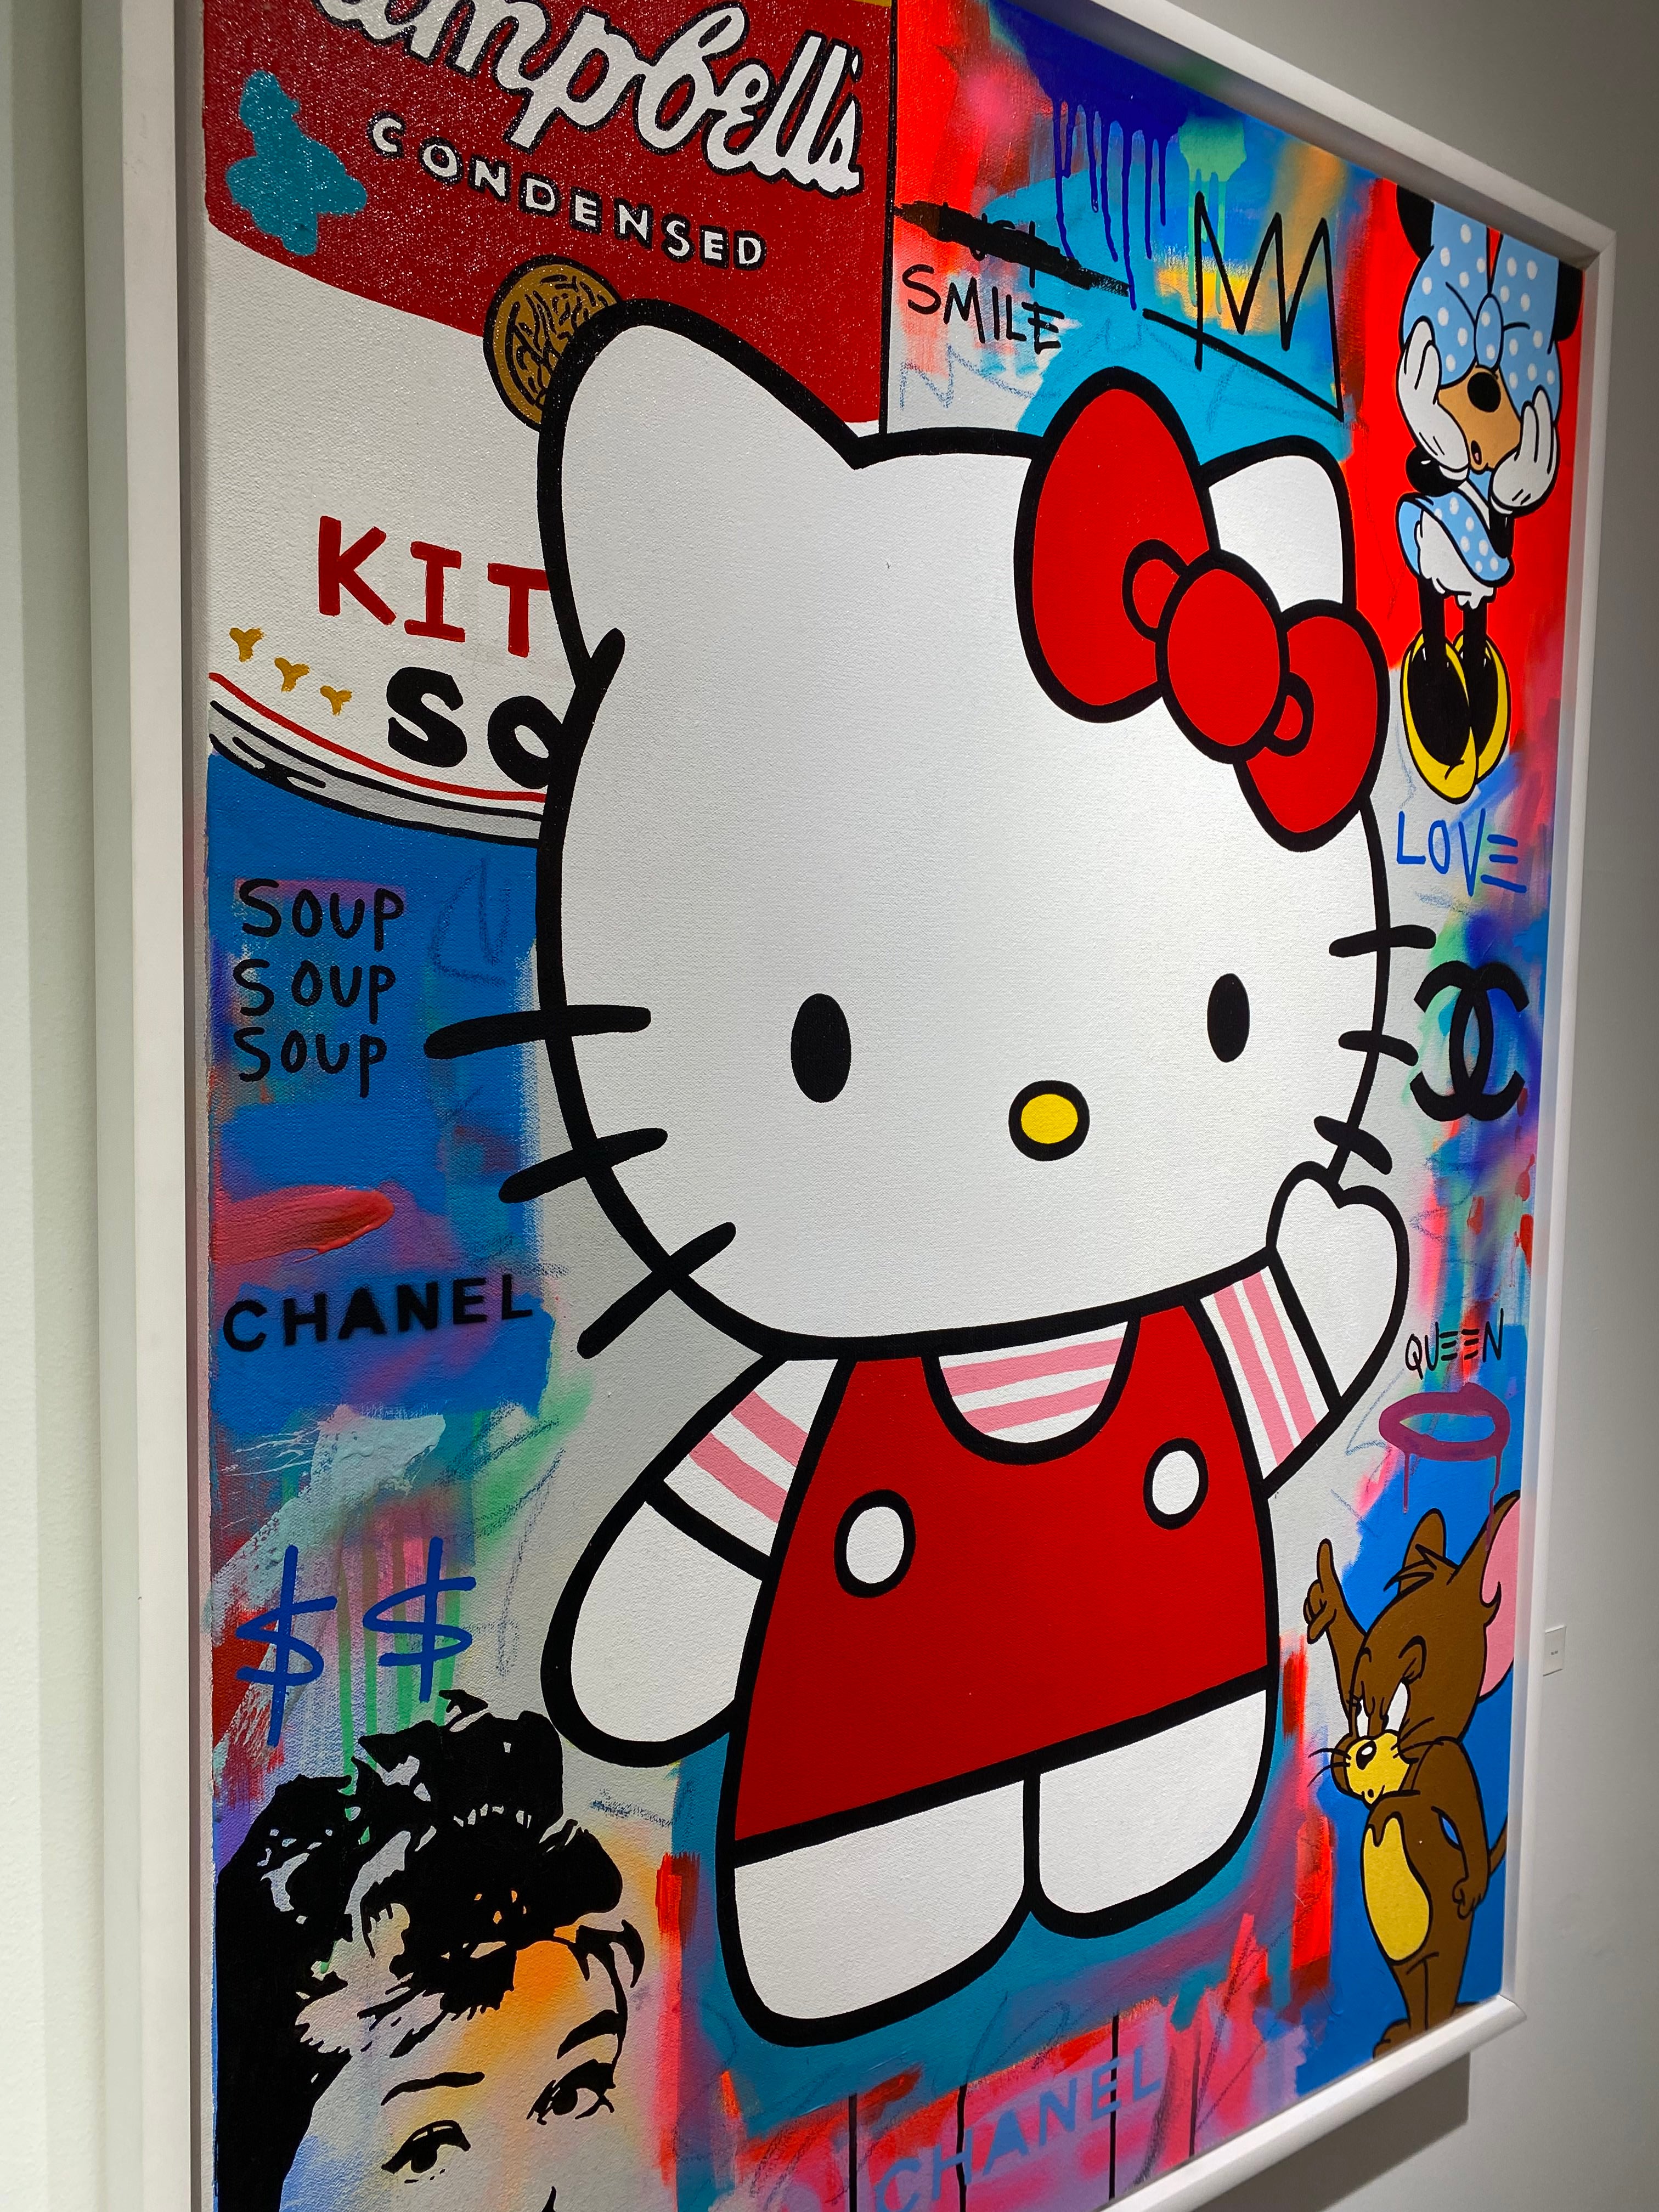 chanel, hello kitty and hello kitty drawings - image #582018 on